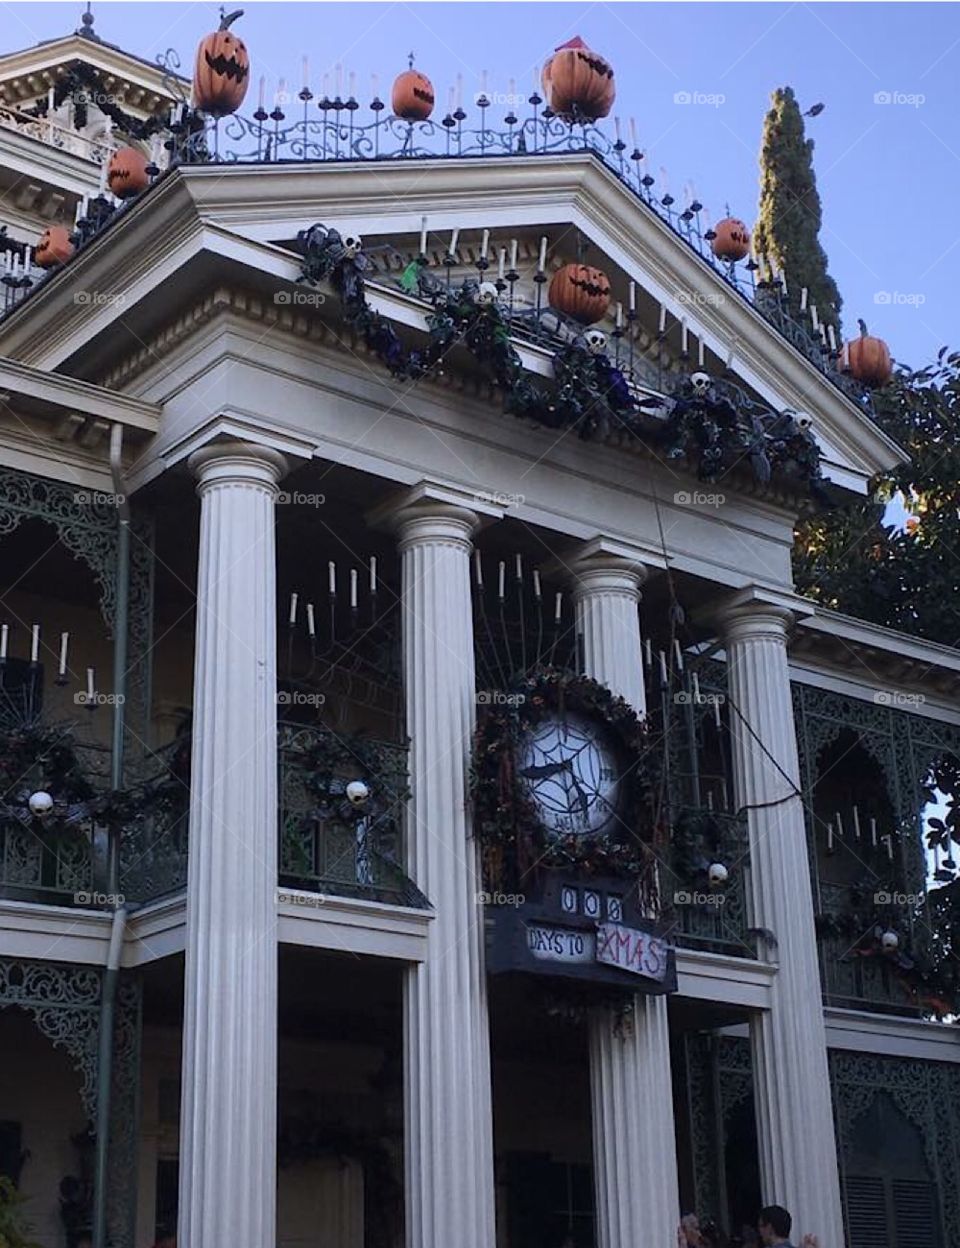 Haunted Mansion all decked out for the holidays as Nightmare before Christmas in Disneyland, California. 